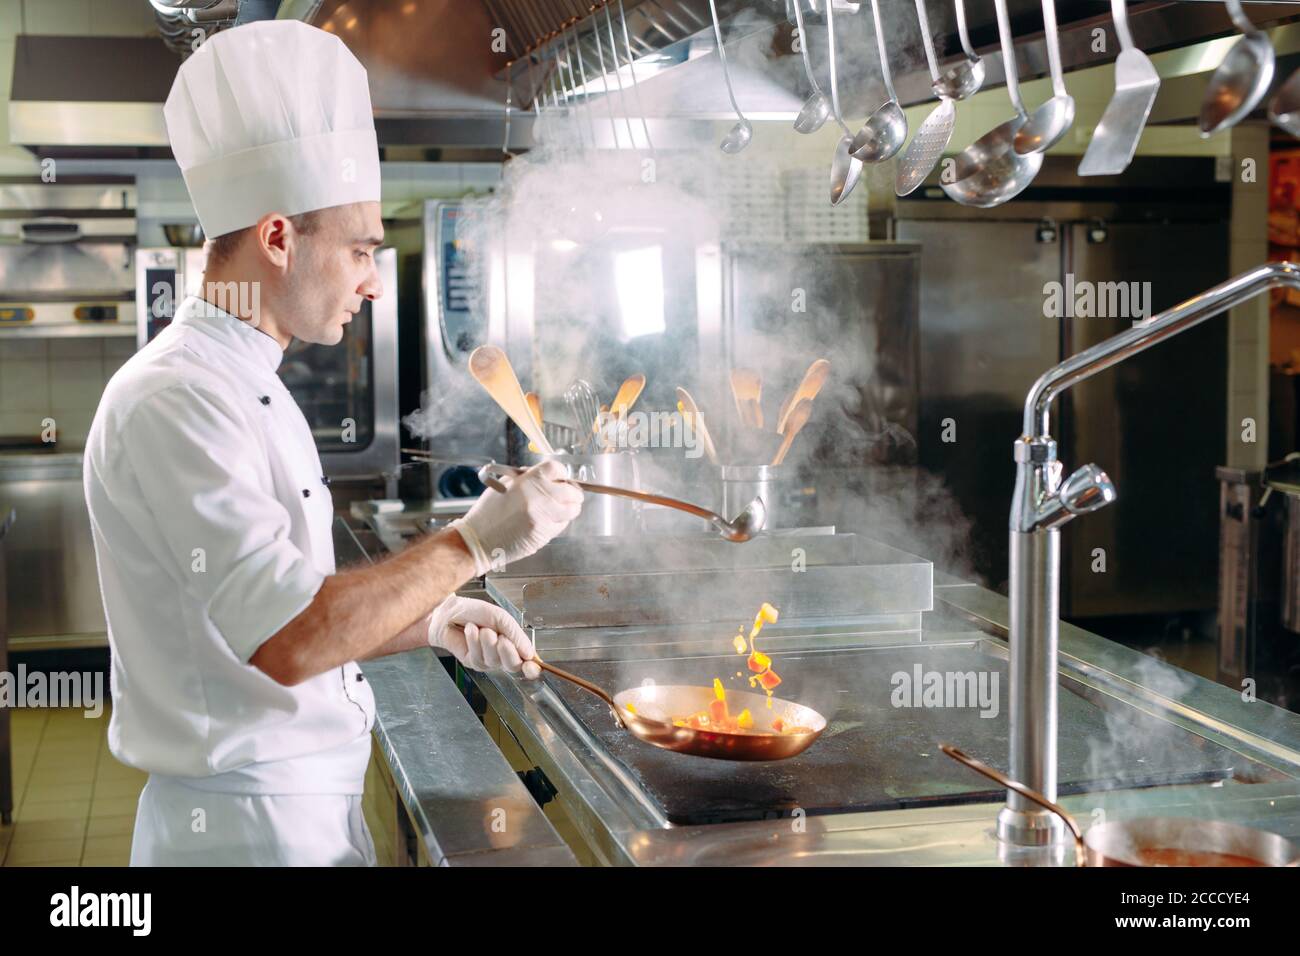 Chef cooking vegetables in wok pan. Shallow dof. Stock Photo